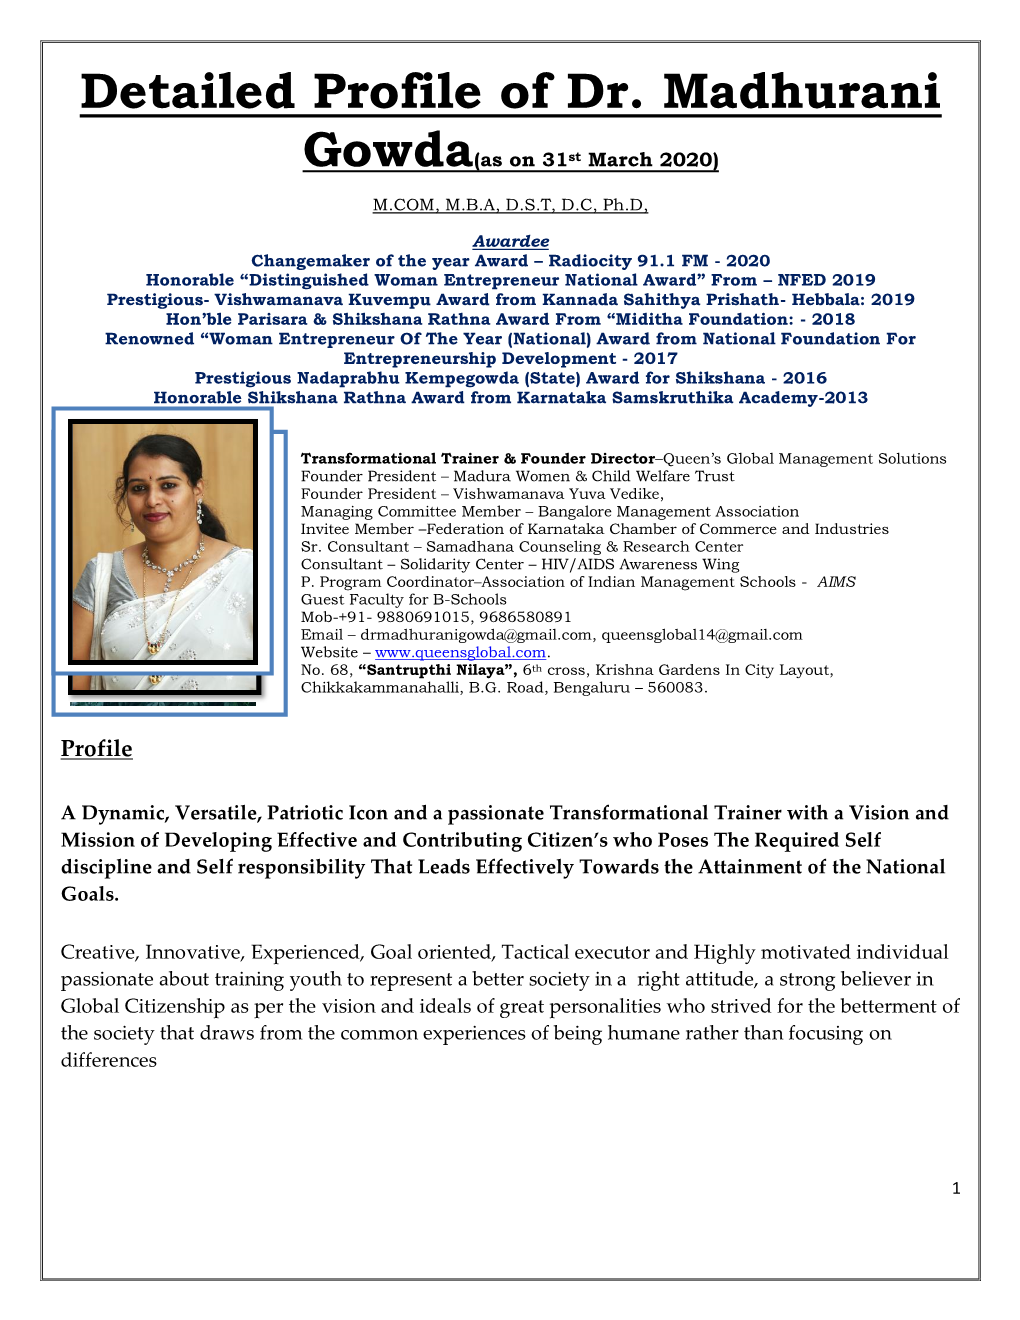 Detailed Profile of Dr. Madhurani Gowda(As on 31St March 2020)